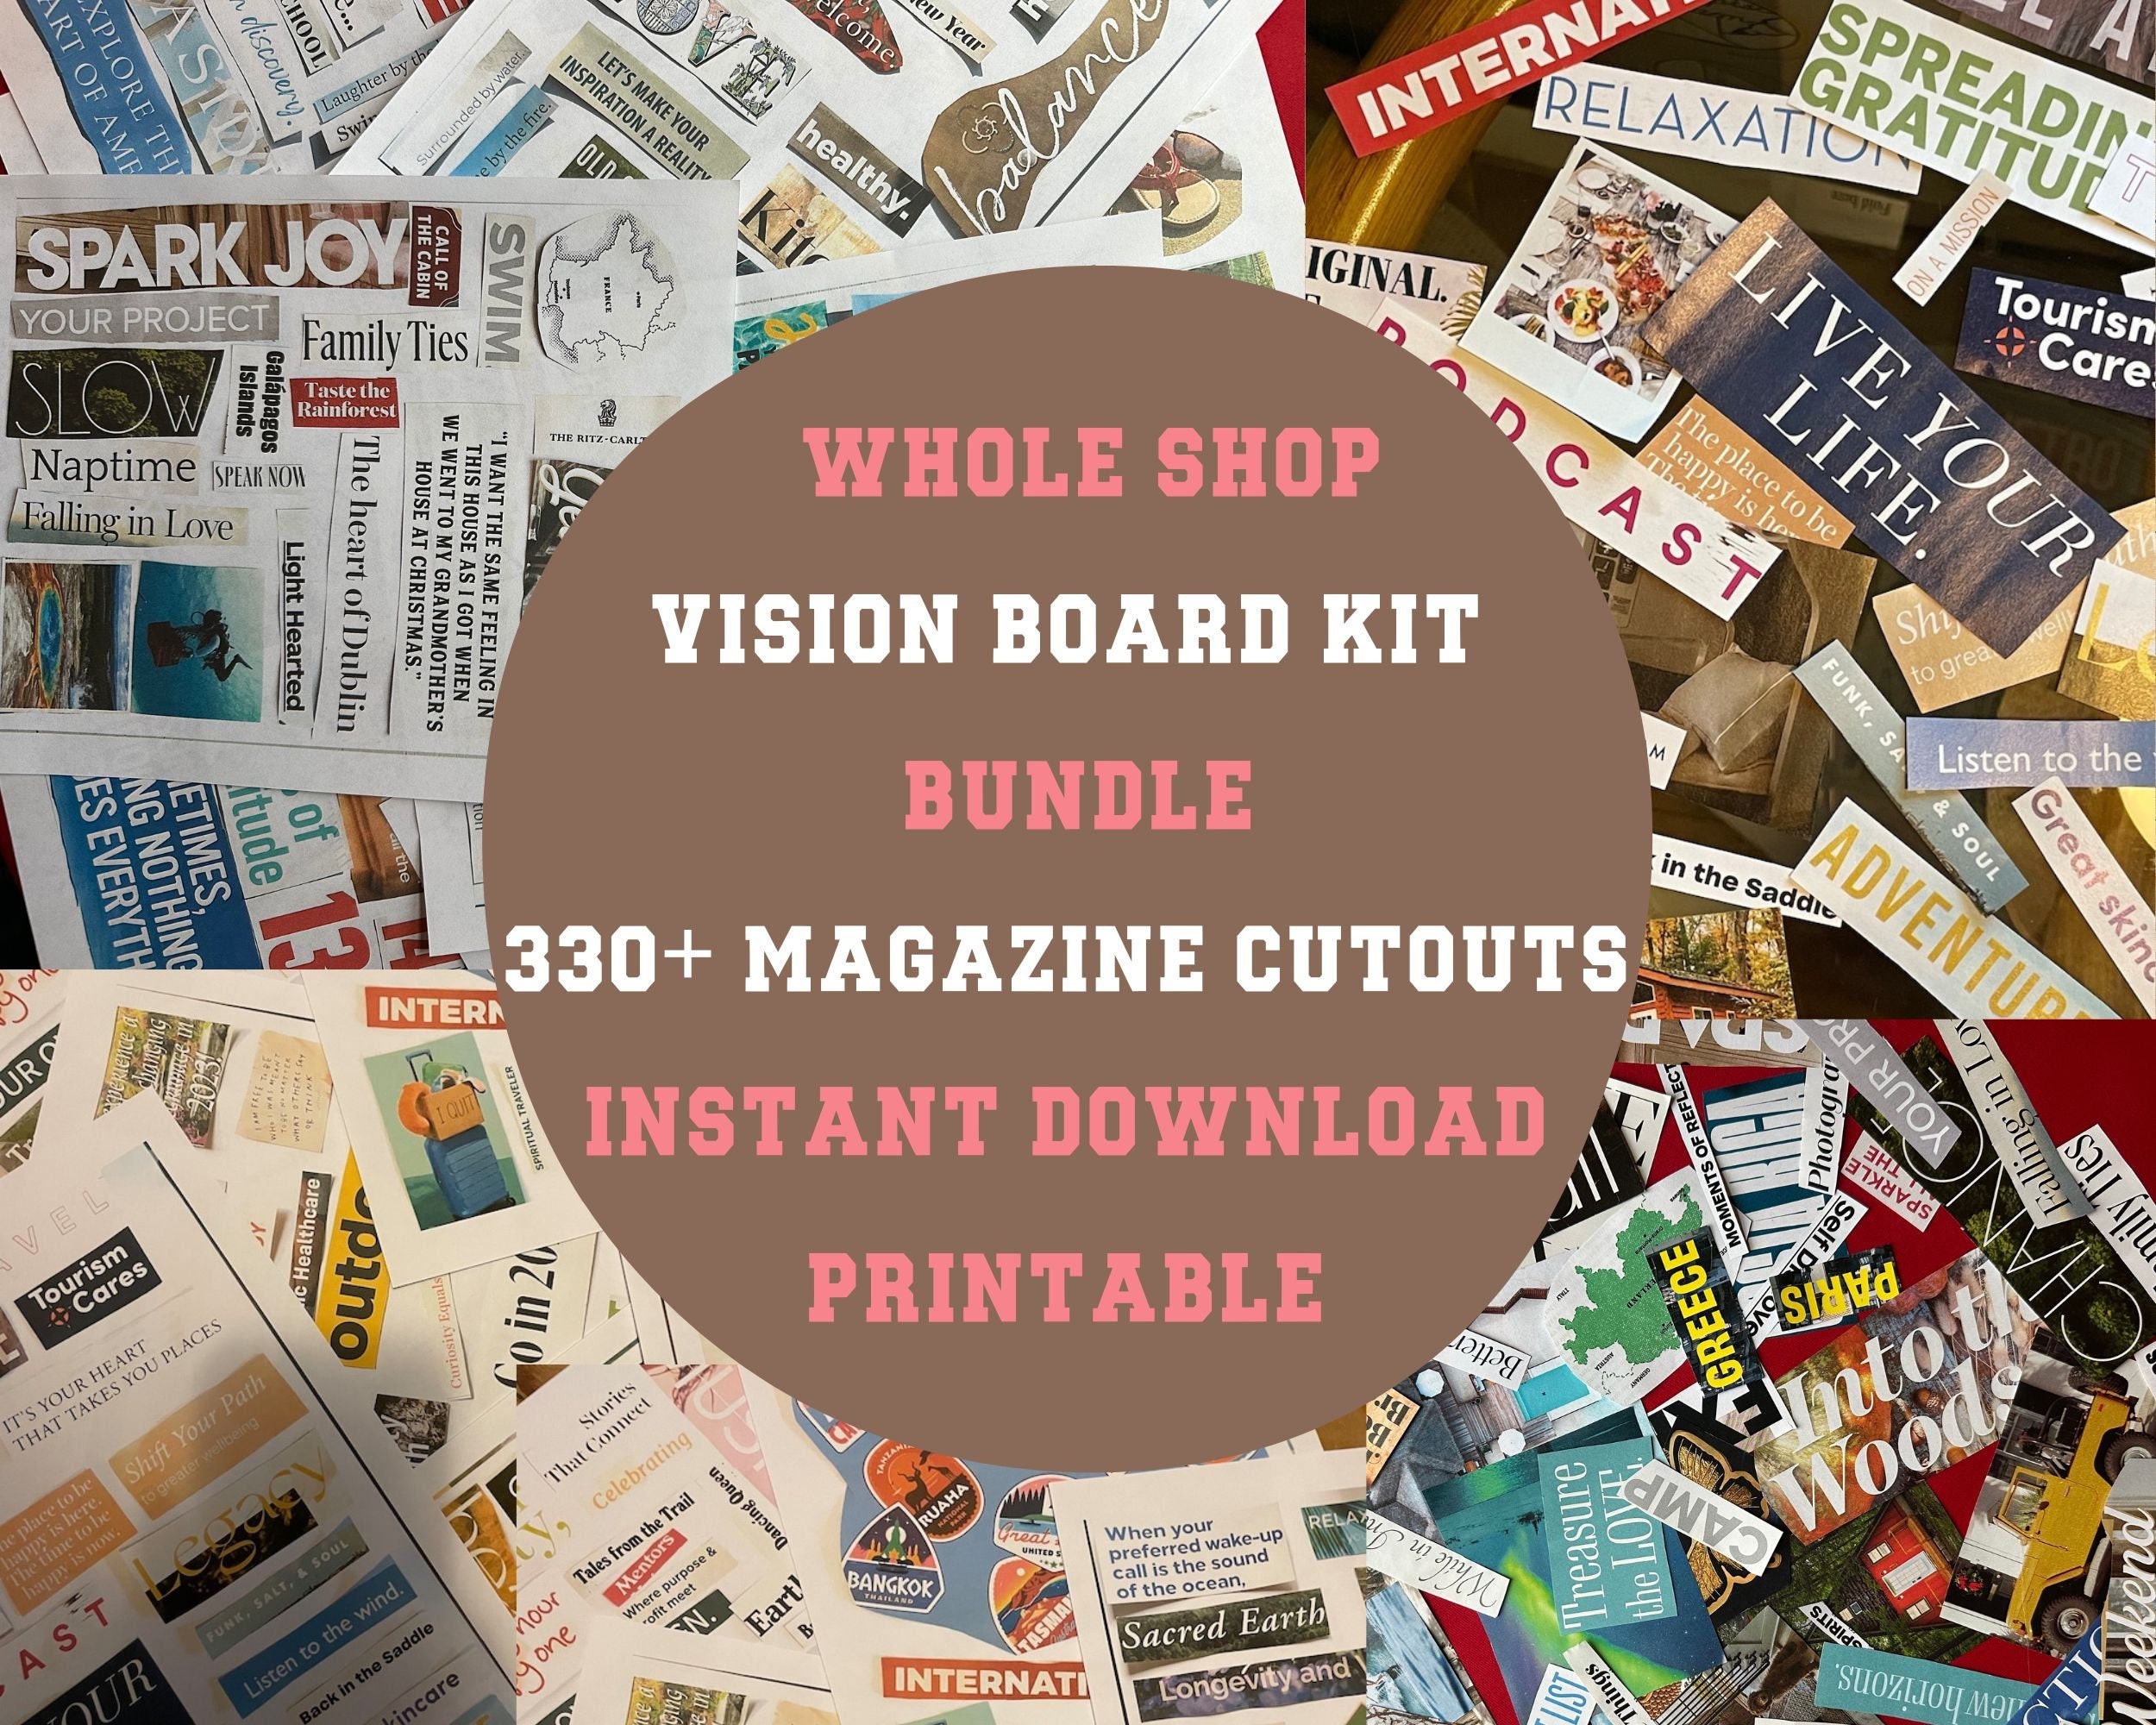 Christian Vision Board Clip Art Book: Christian Vision Board, Scriptural  Affirmations On Healing, Success, Spiritual Growth, Journal, & lots more.